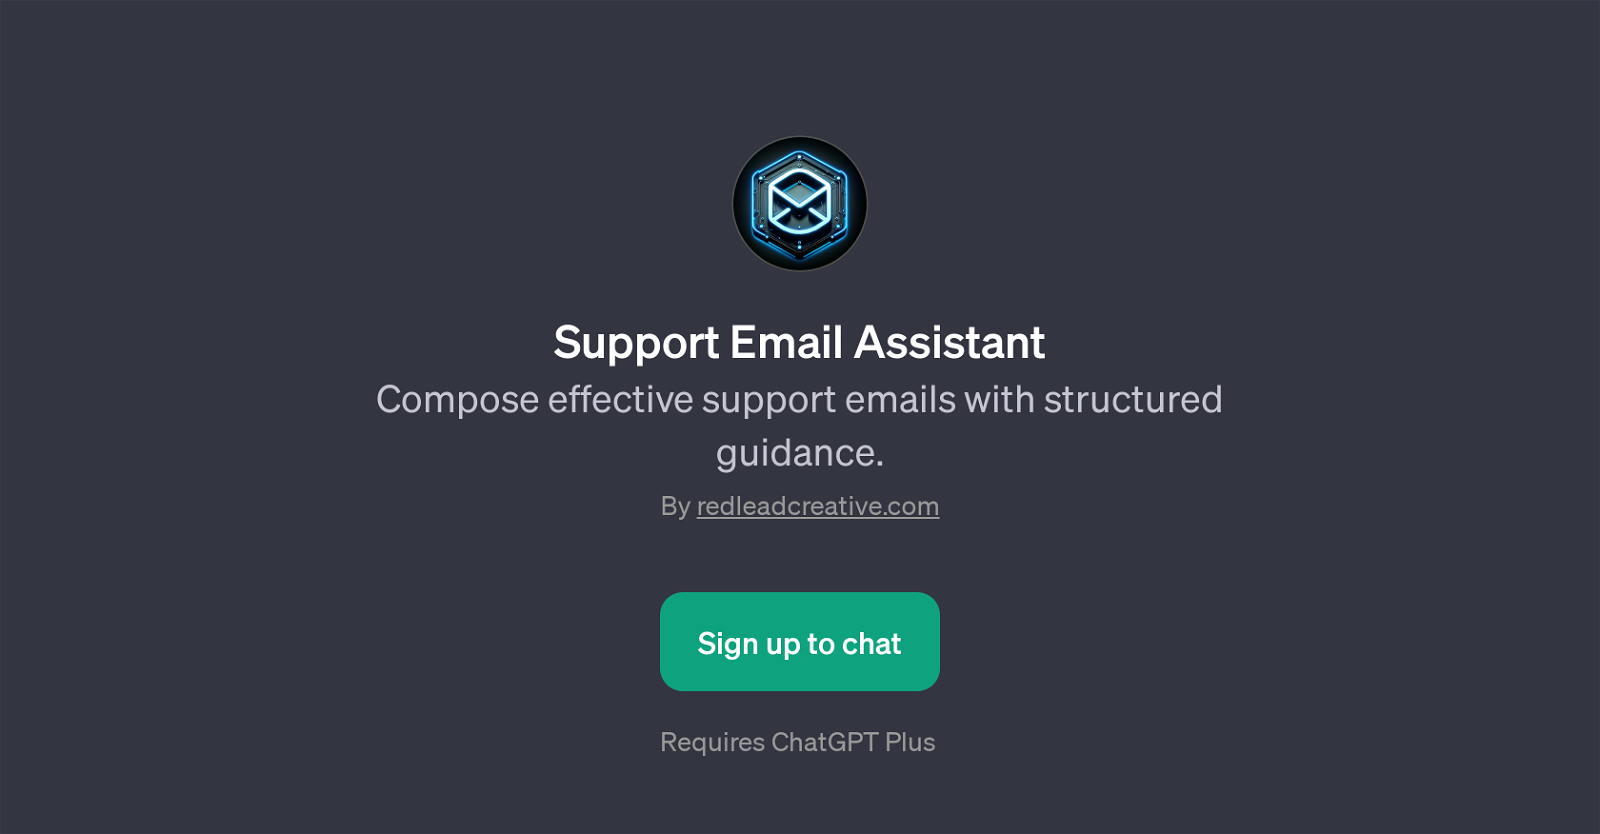 Support Email Assistant website